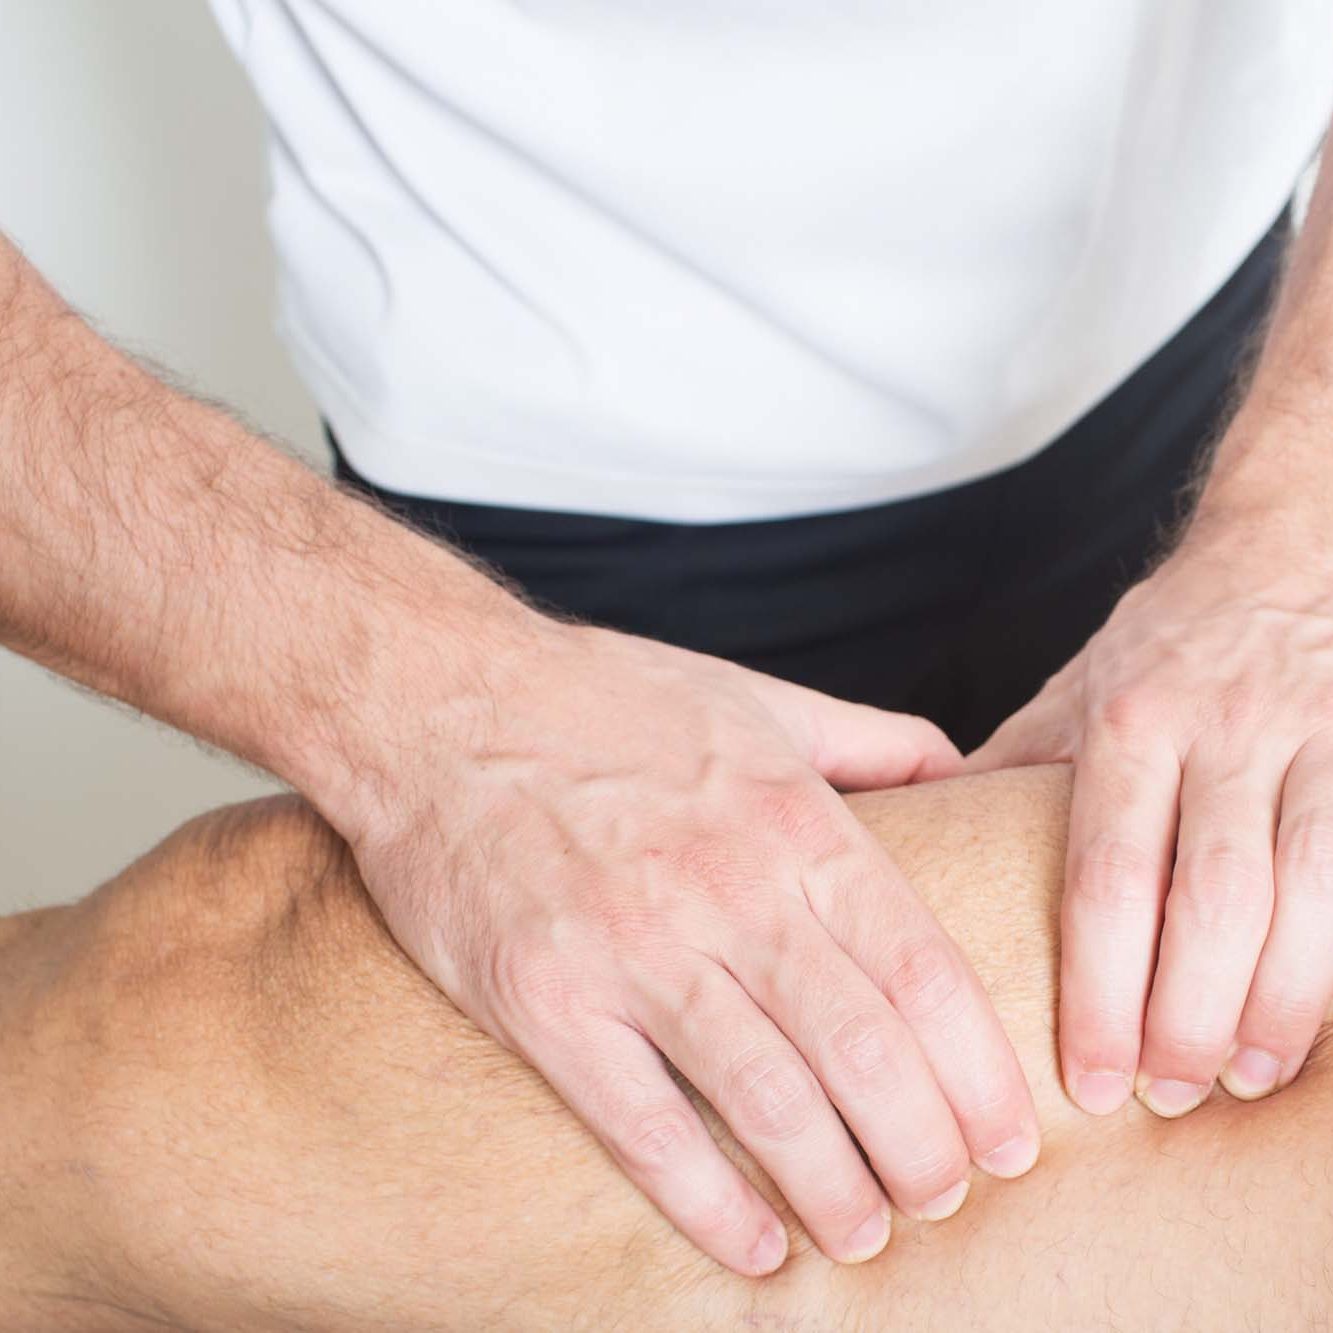 Adductor problems treatment at physiotherapy